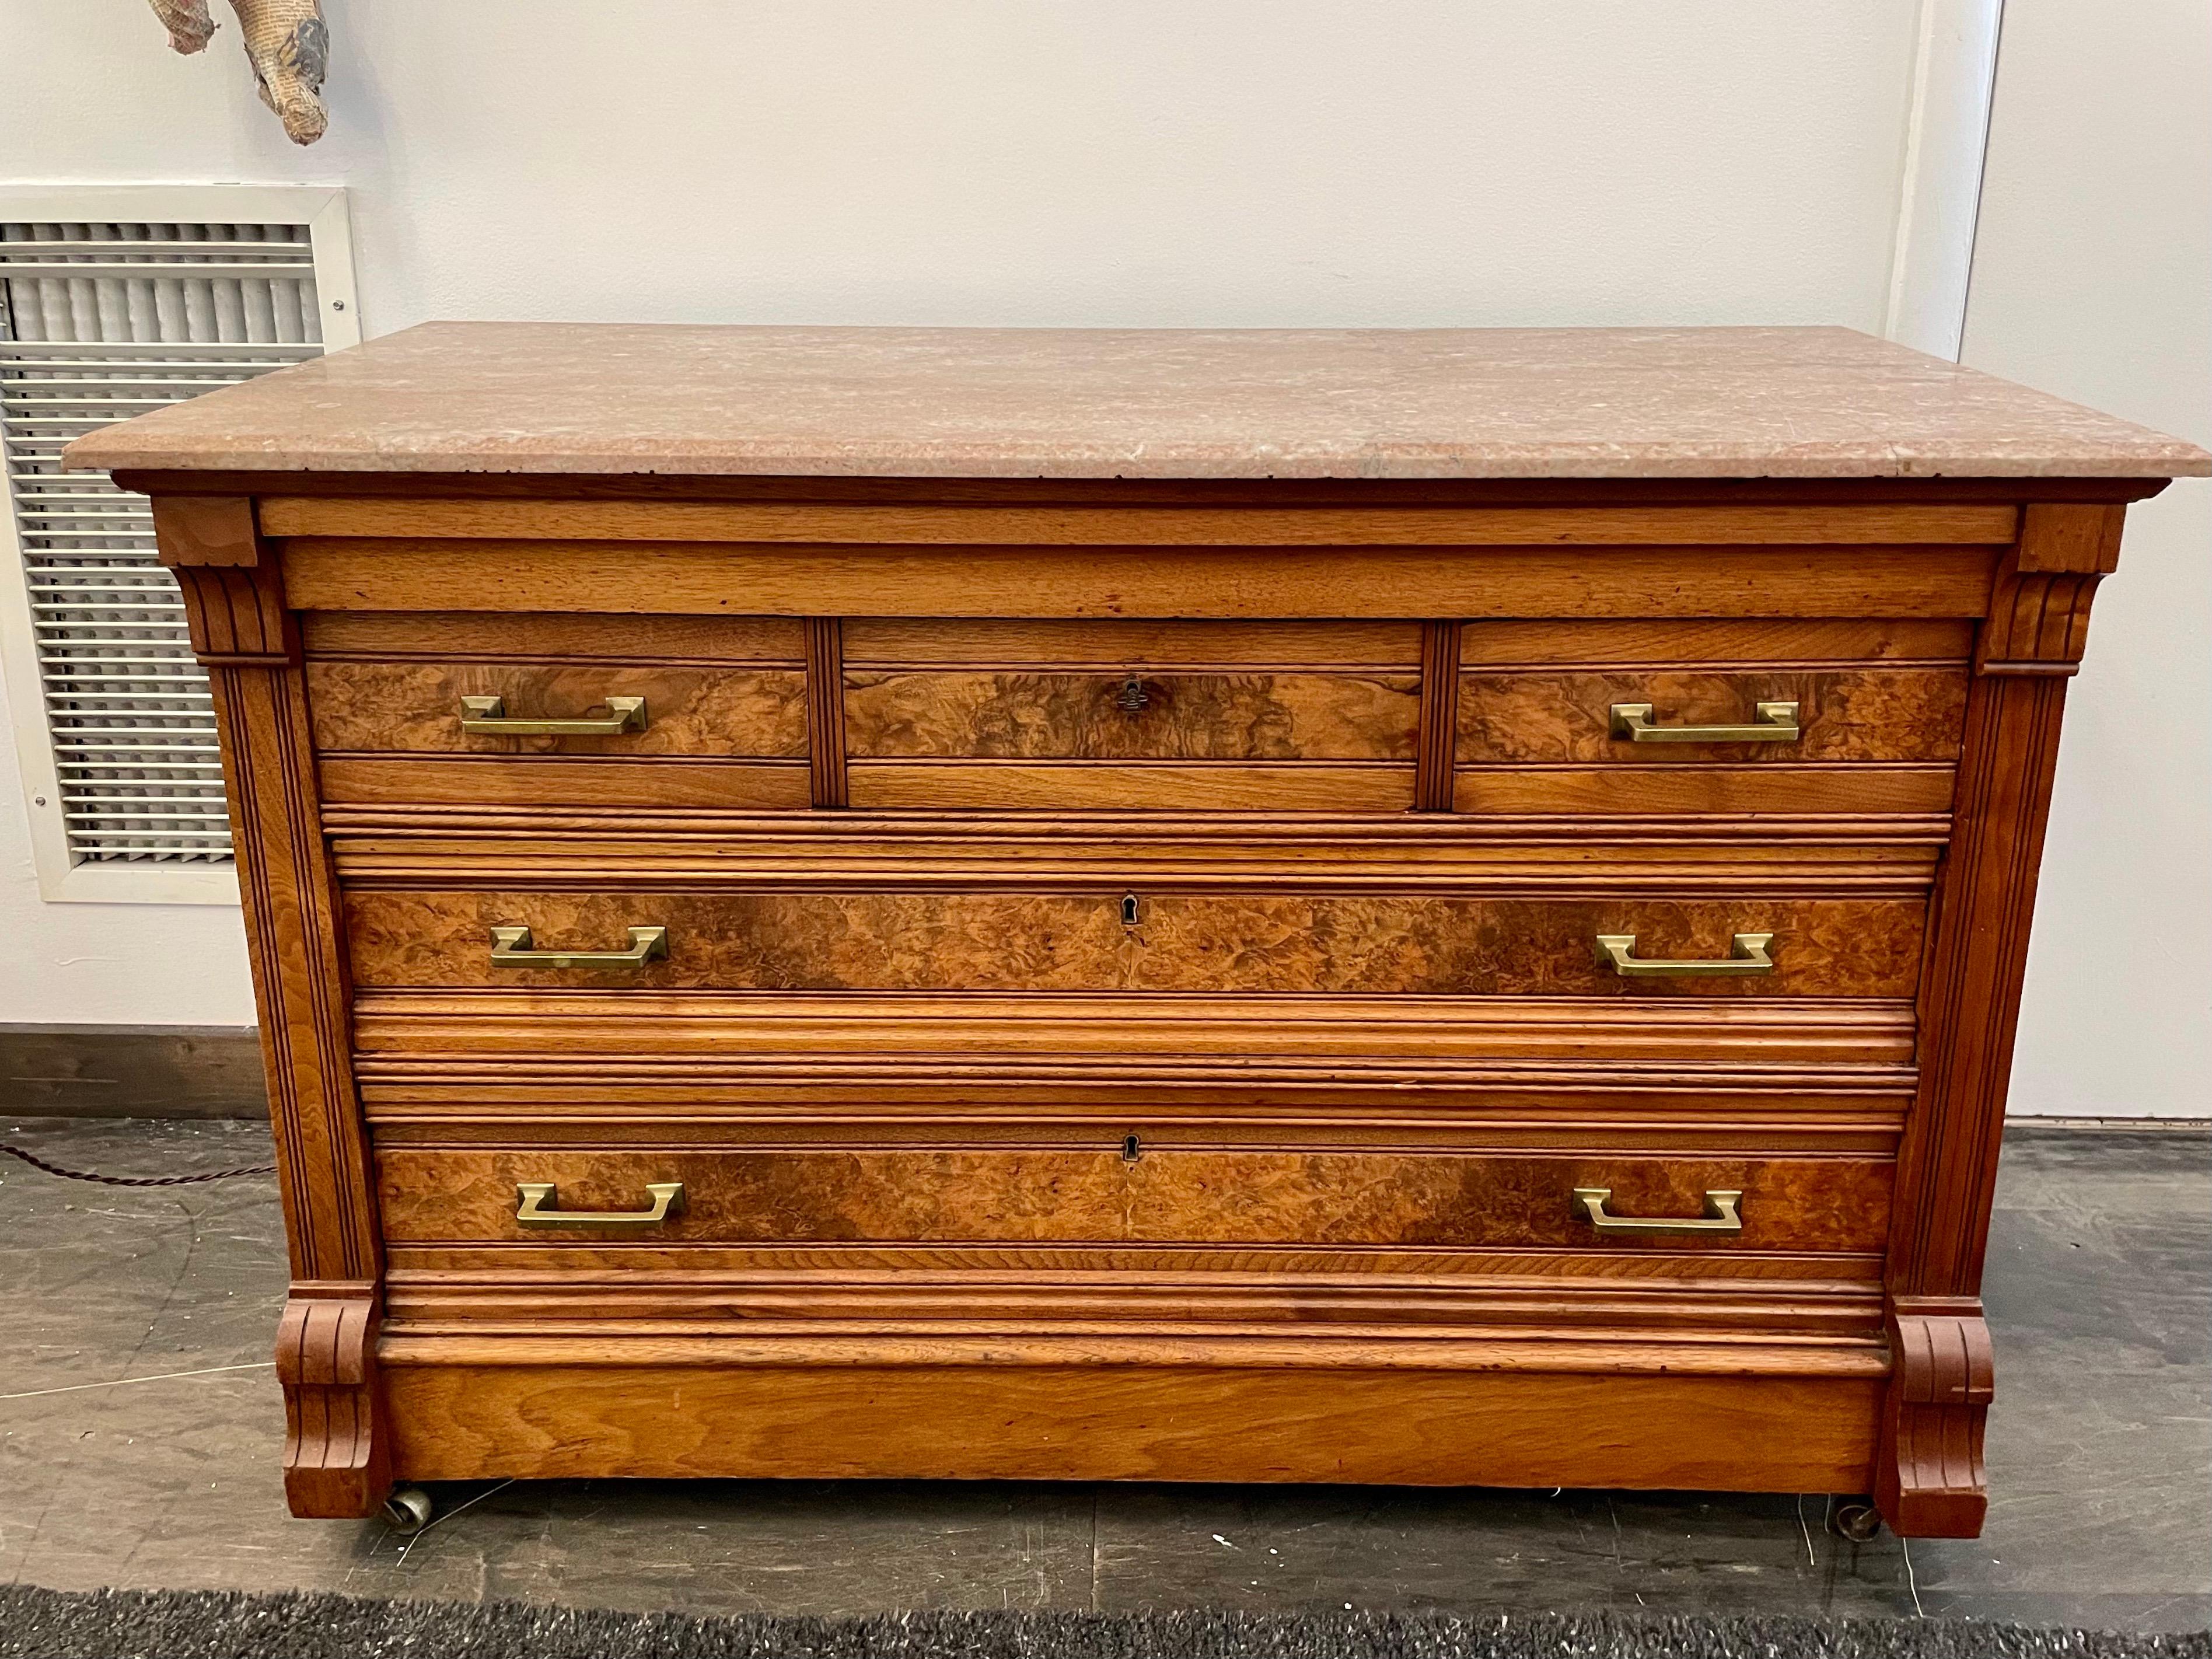 This wonderful piece is on casters with ALL original hardware. Top three drawers are felt lined with compartments - total of five drawers. Pink marble top is also original and beautiful. Burled wood veneer to façade of cabinet. This fabulous Italian